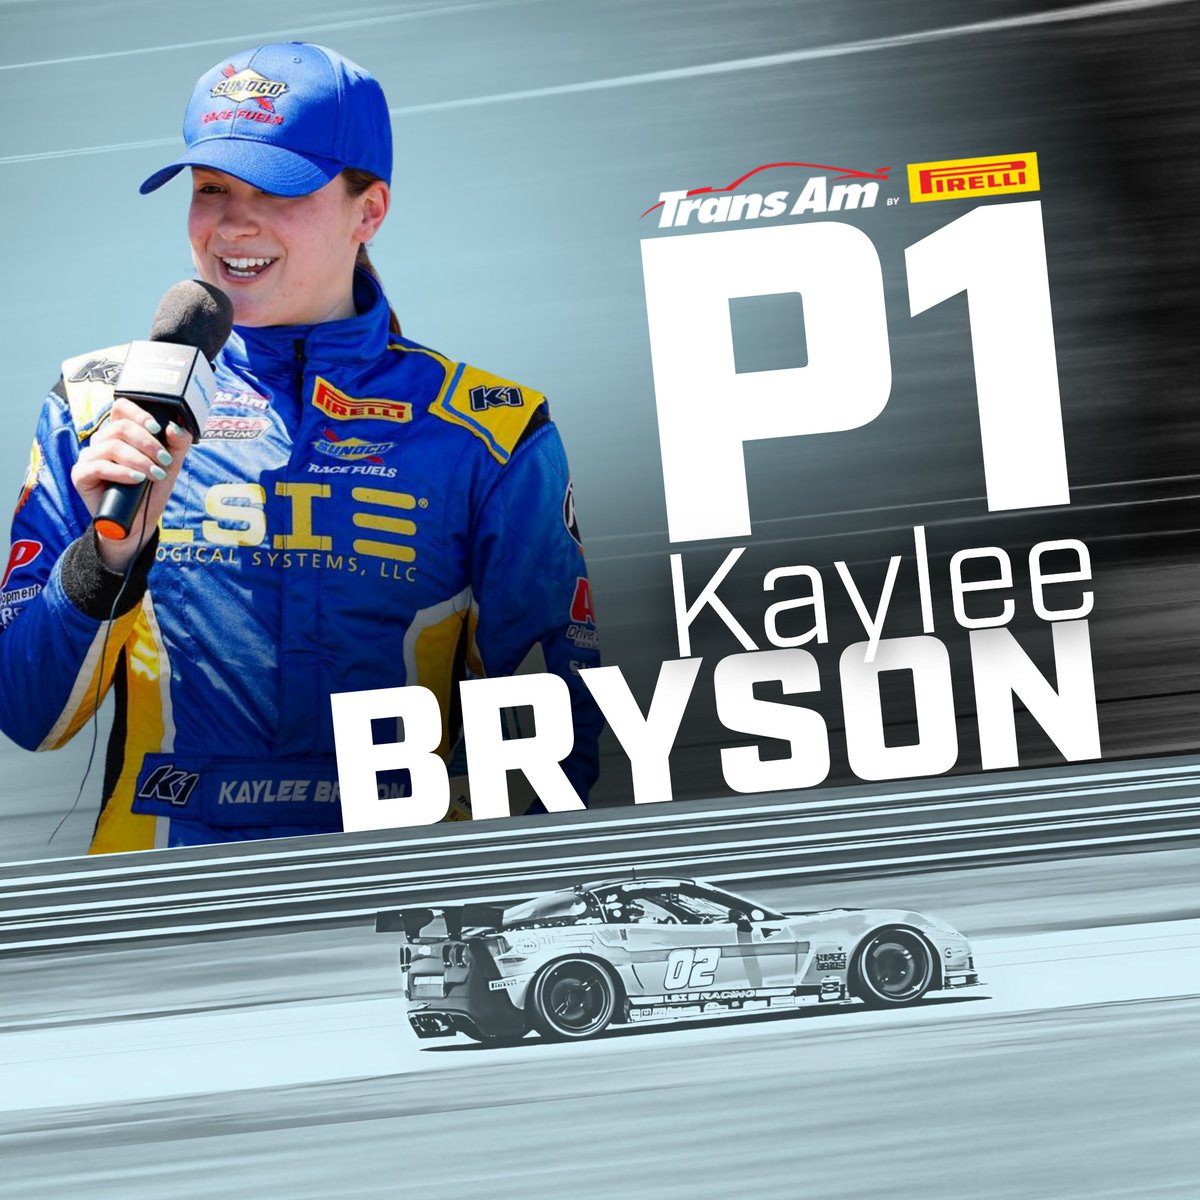 Congratulations to Kaylee Bryson for your Trans Am win at NOLA Motorsports Park ! Good luck at the USAC Silver Crown in Toledo!! #transam | #speedtour | #womeninmotorsportsna | #usacsilvercrownseries | #pirelli